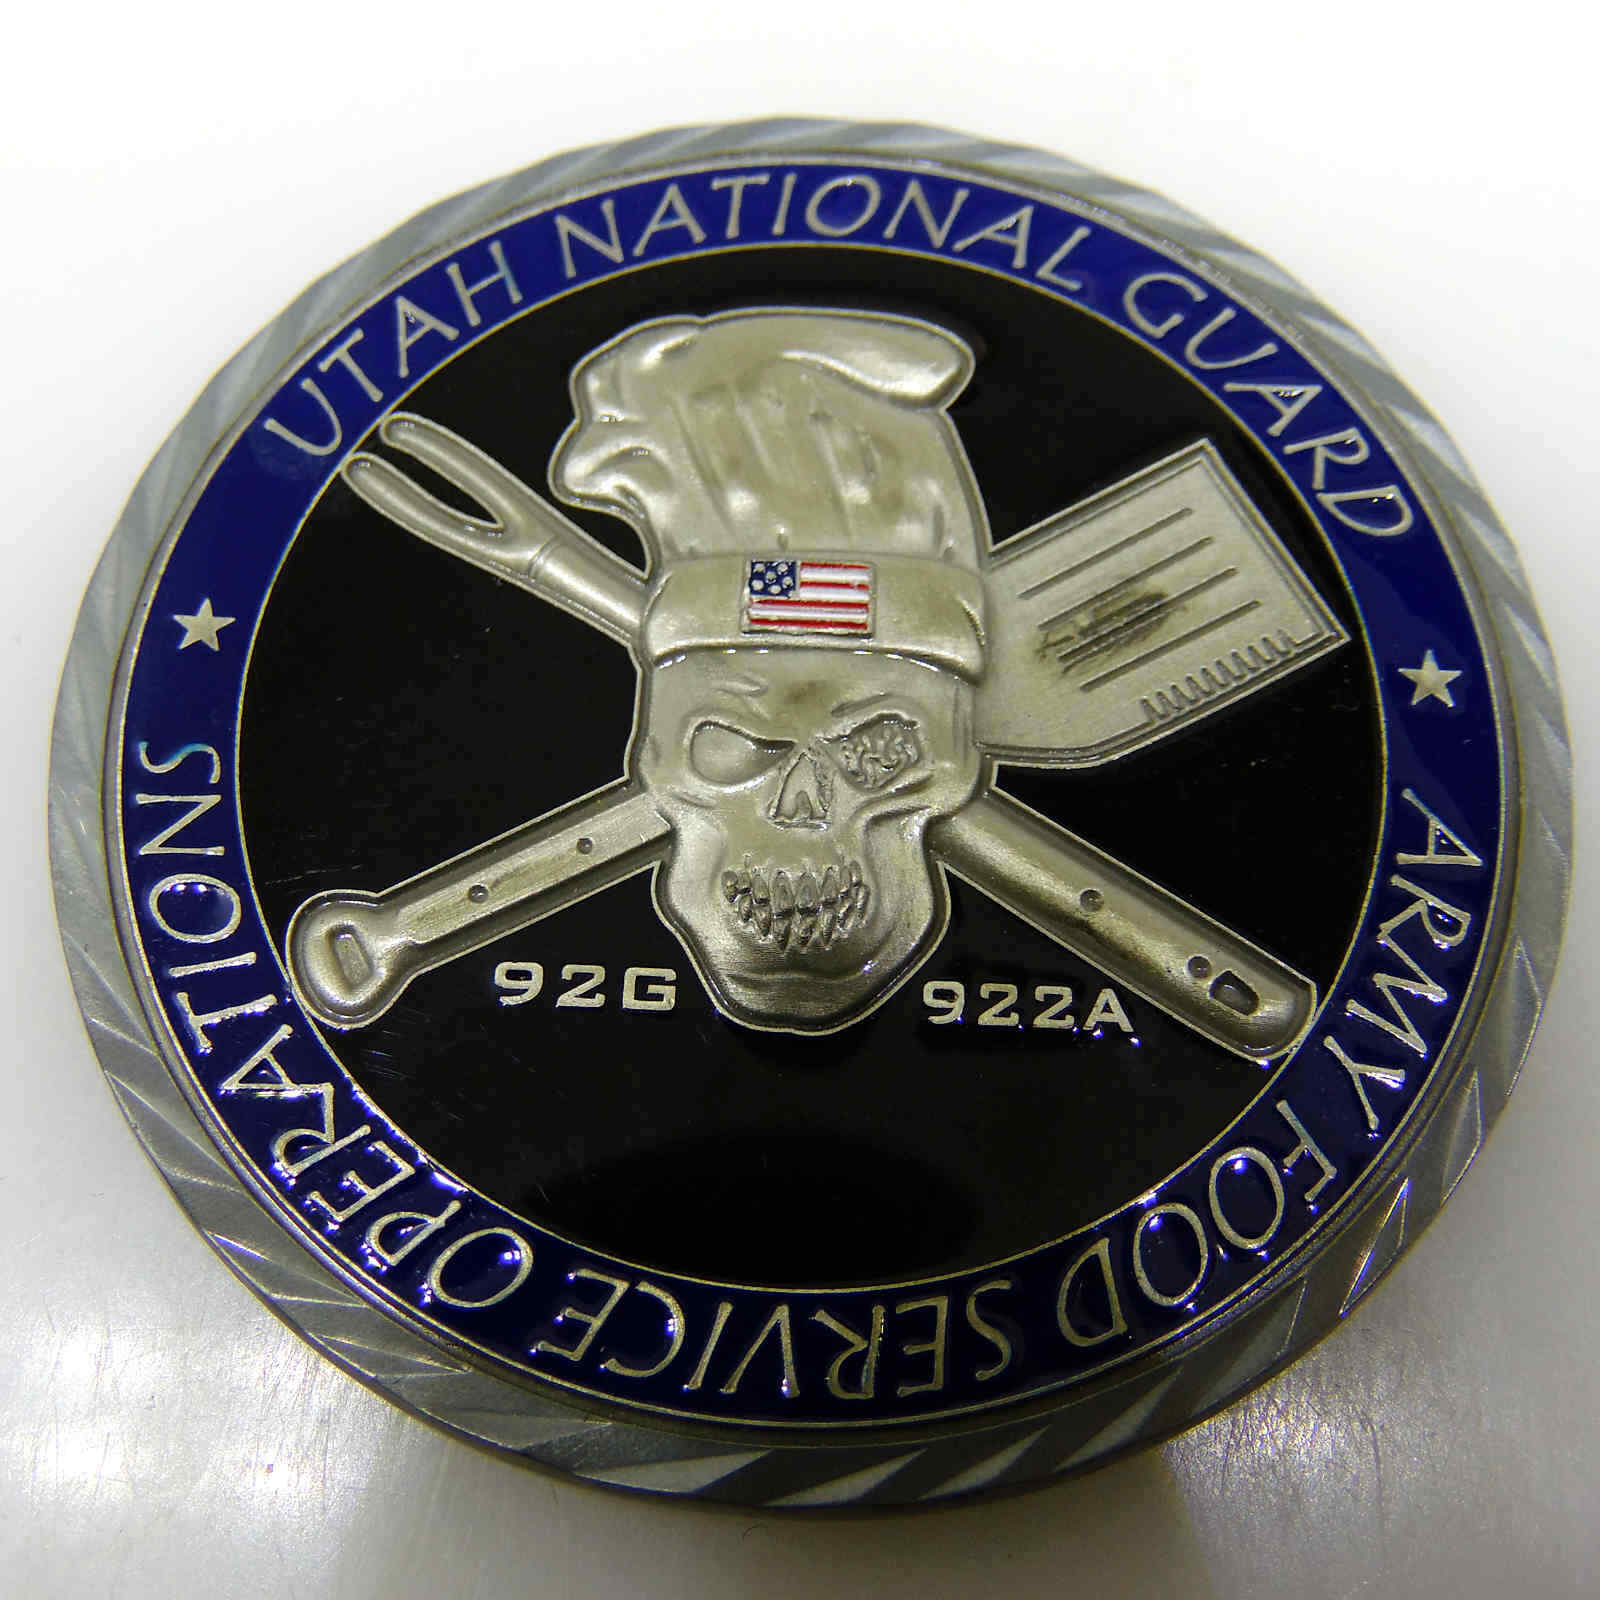 UTAH NATIONAL GUARD ARMY FOOD SERVICE OPERATIONS CHALLENGE COIN